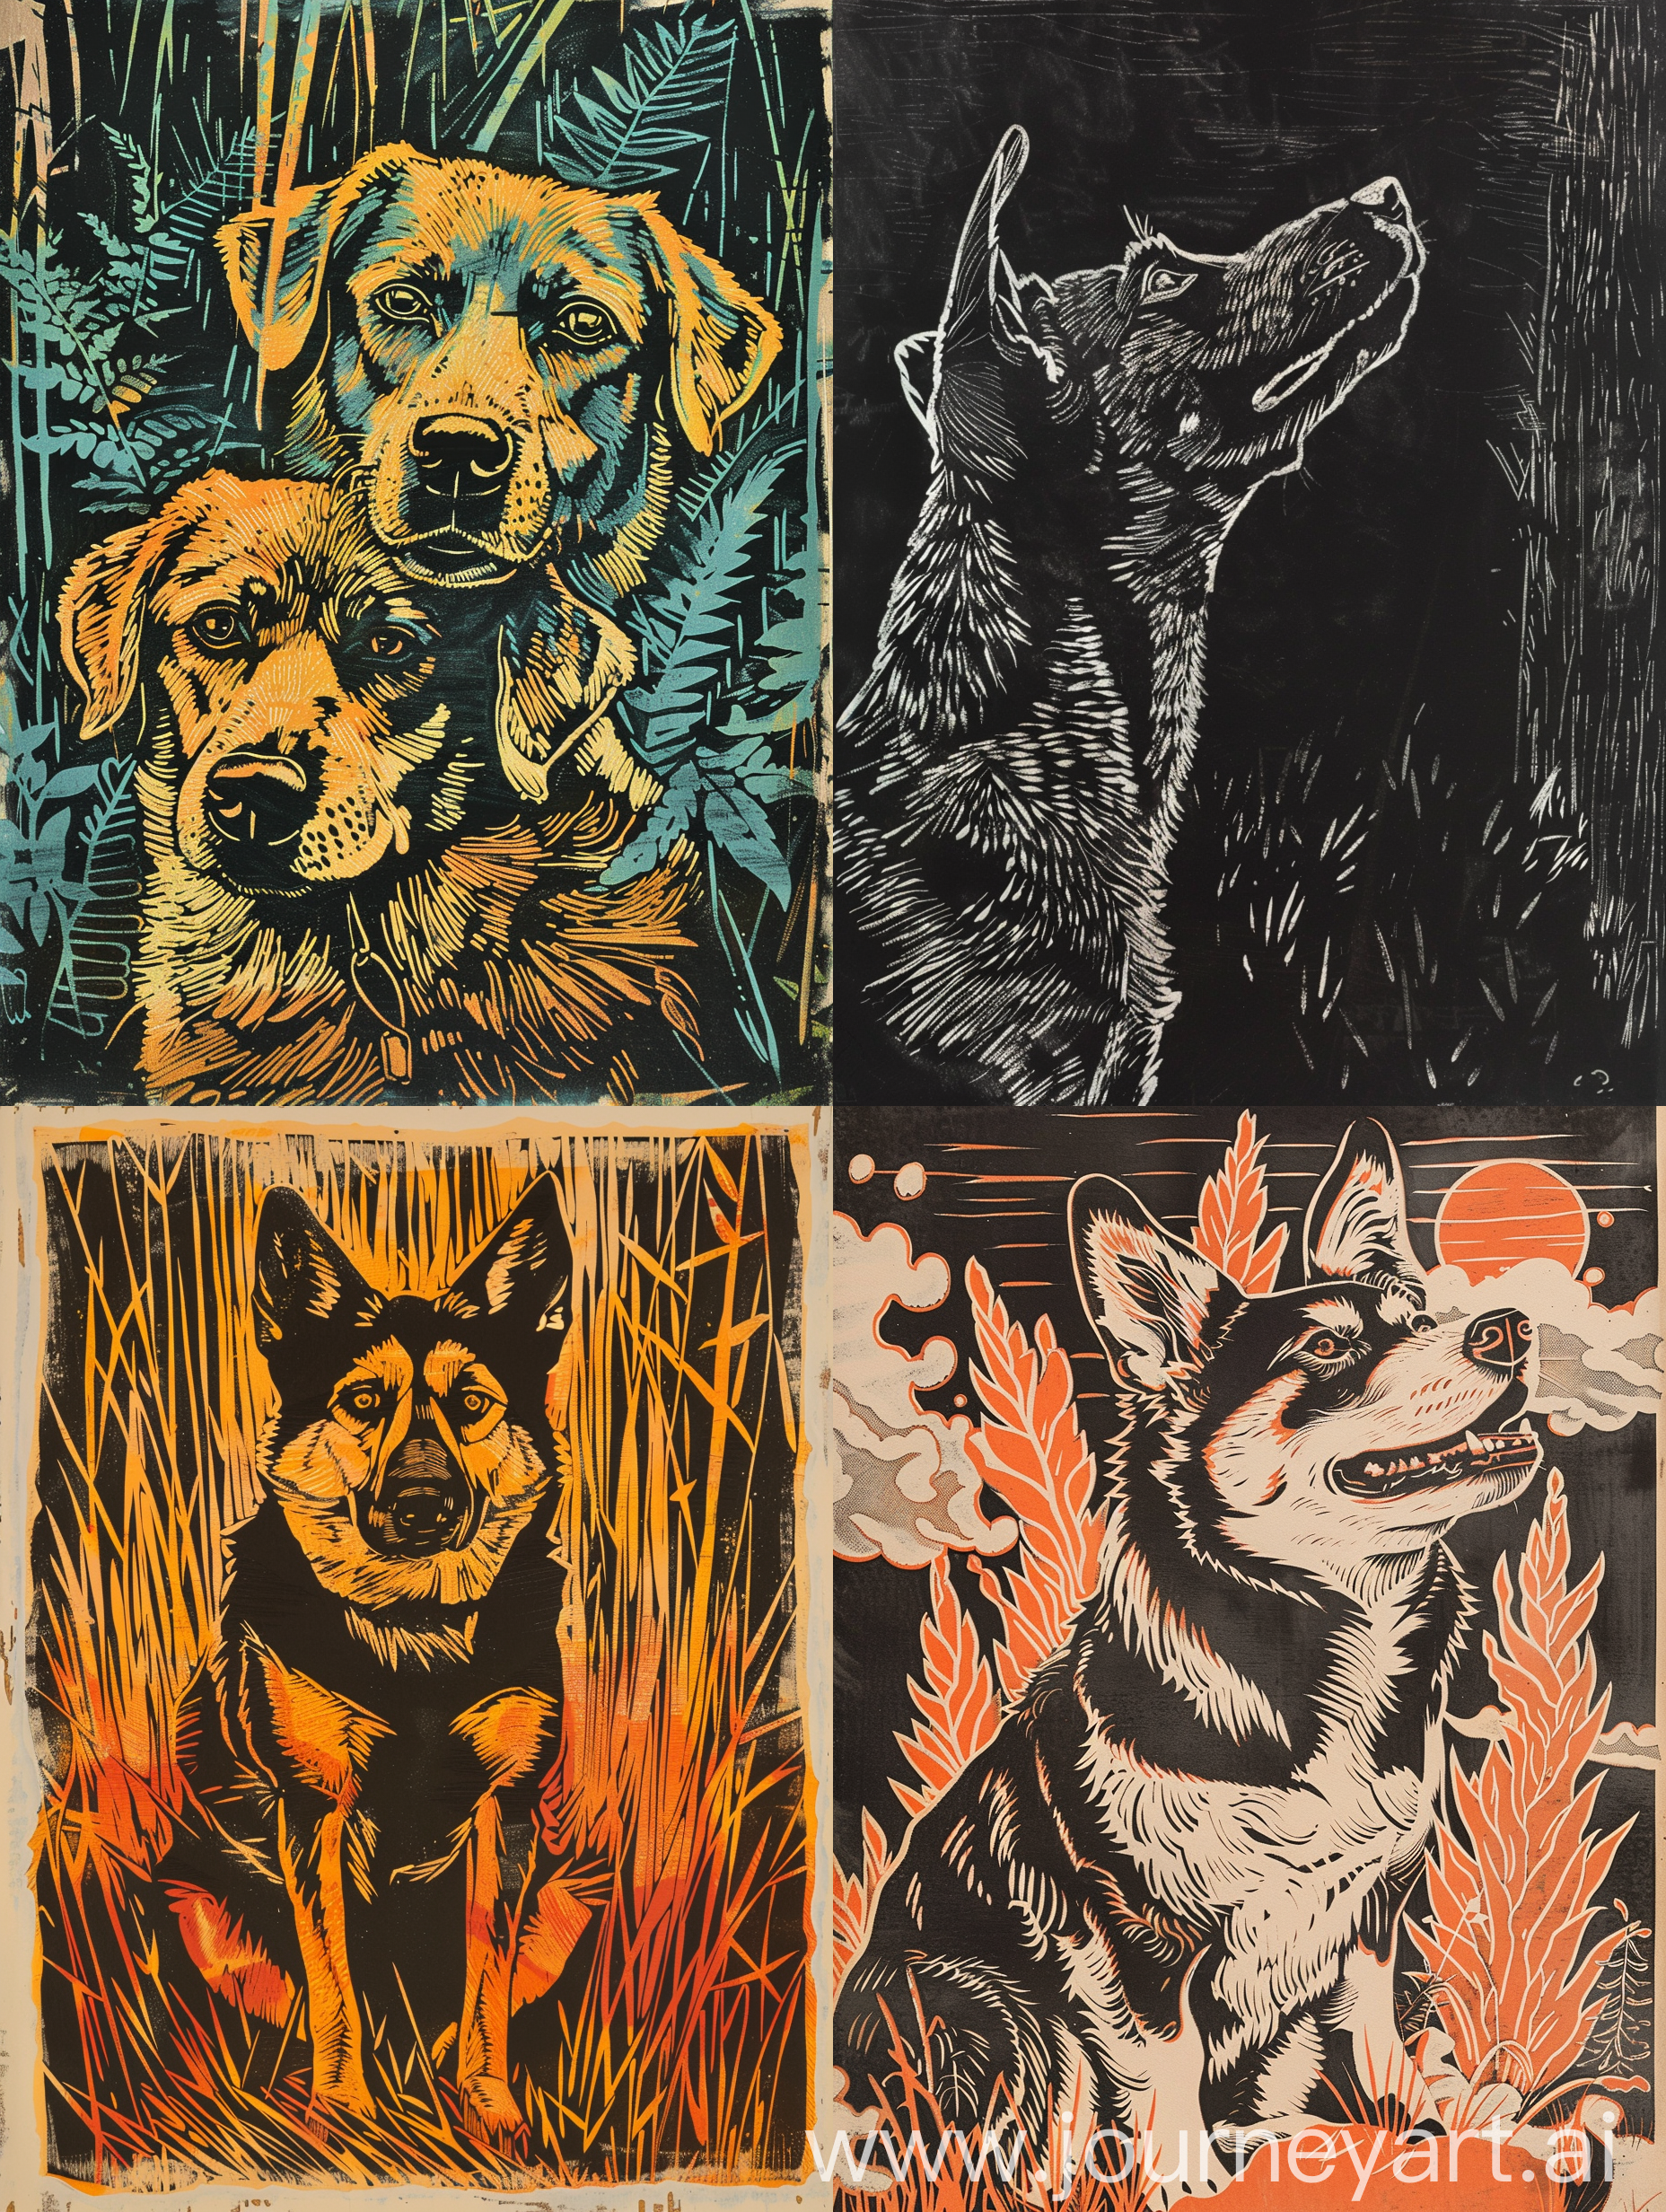 This woodcut print is themed on dogs, conveying the beauty and spirituality of canine animals. Through skillful technique, it presents vivid form and details, making it an extremely aesthetically pleasing and collectible work of art.